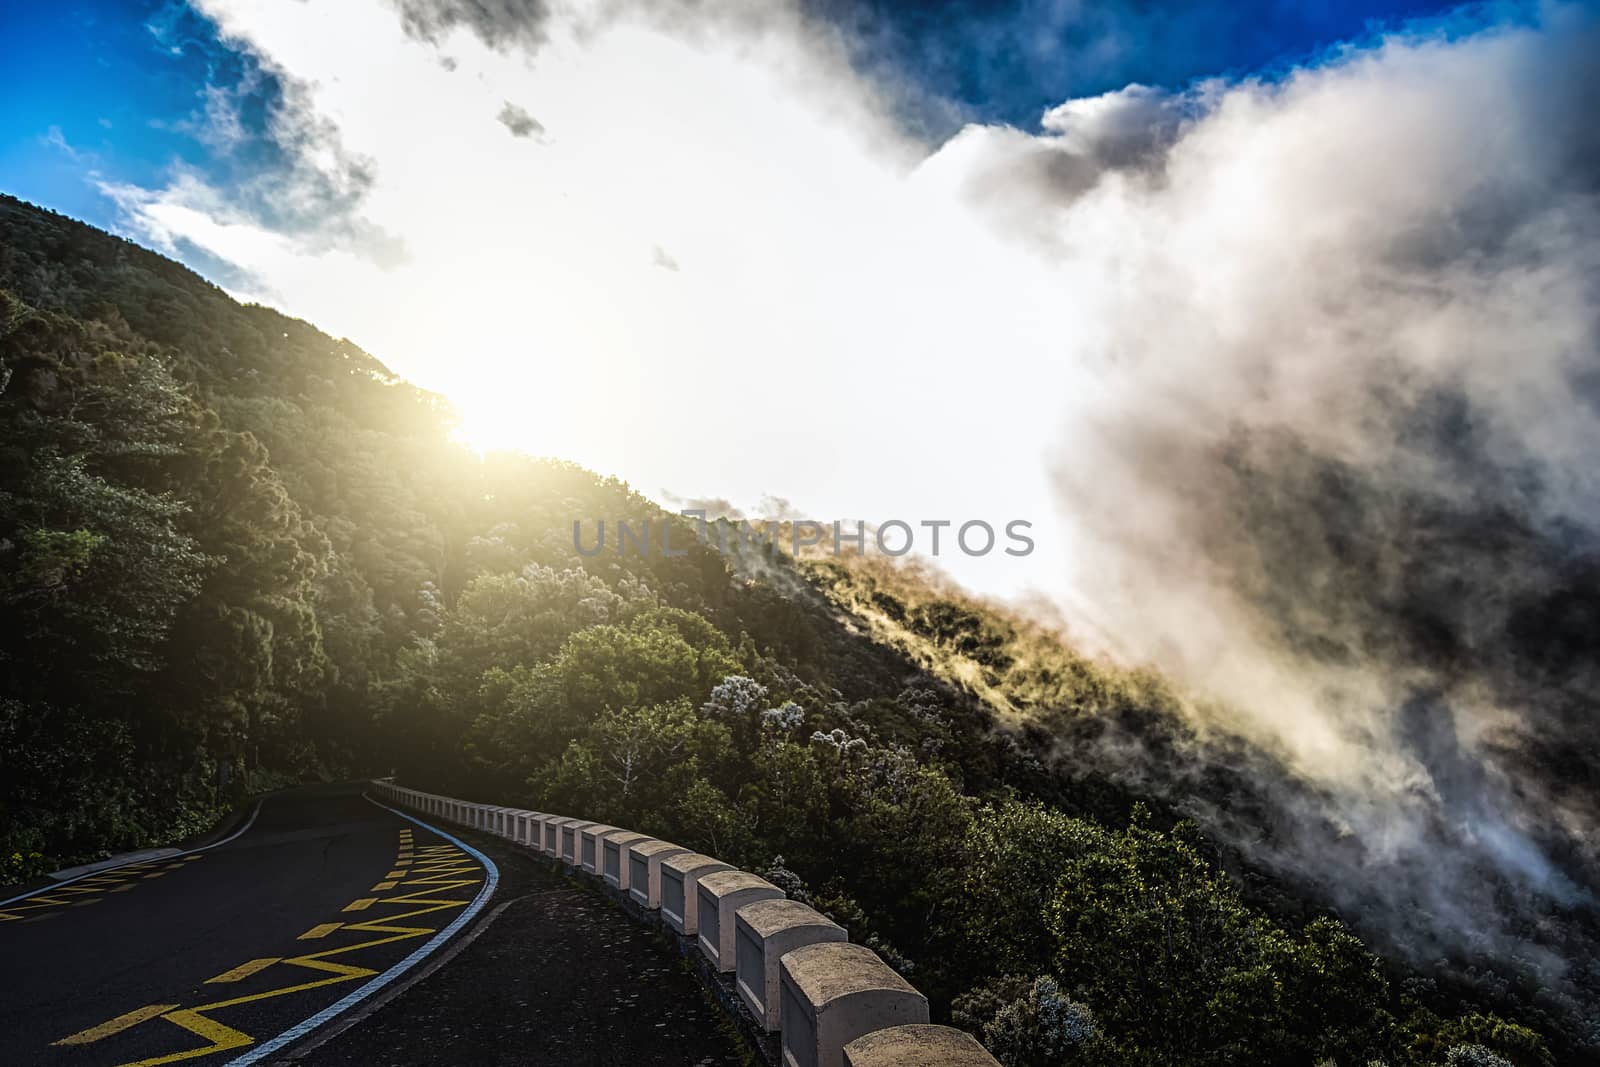 Asphalt road in mountains or rocks and sky with sun and sunlight and clouds over peak in Tenerife Canary island, Spain at sunset